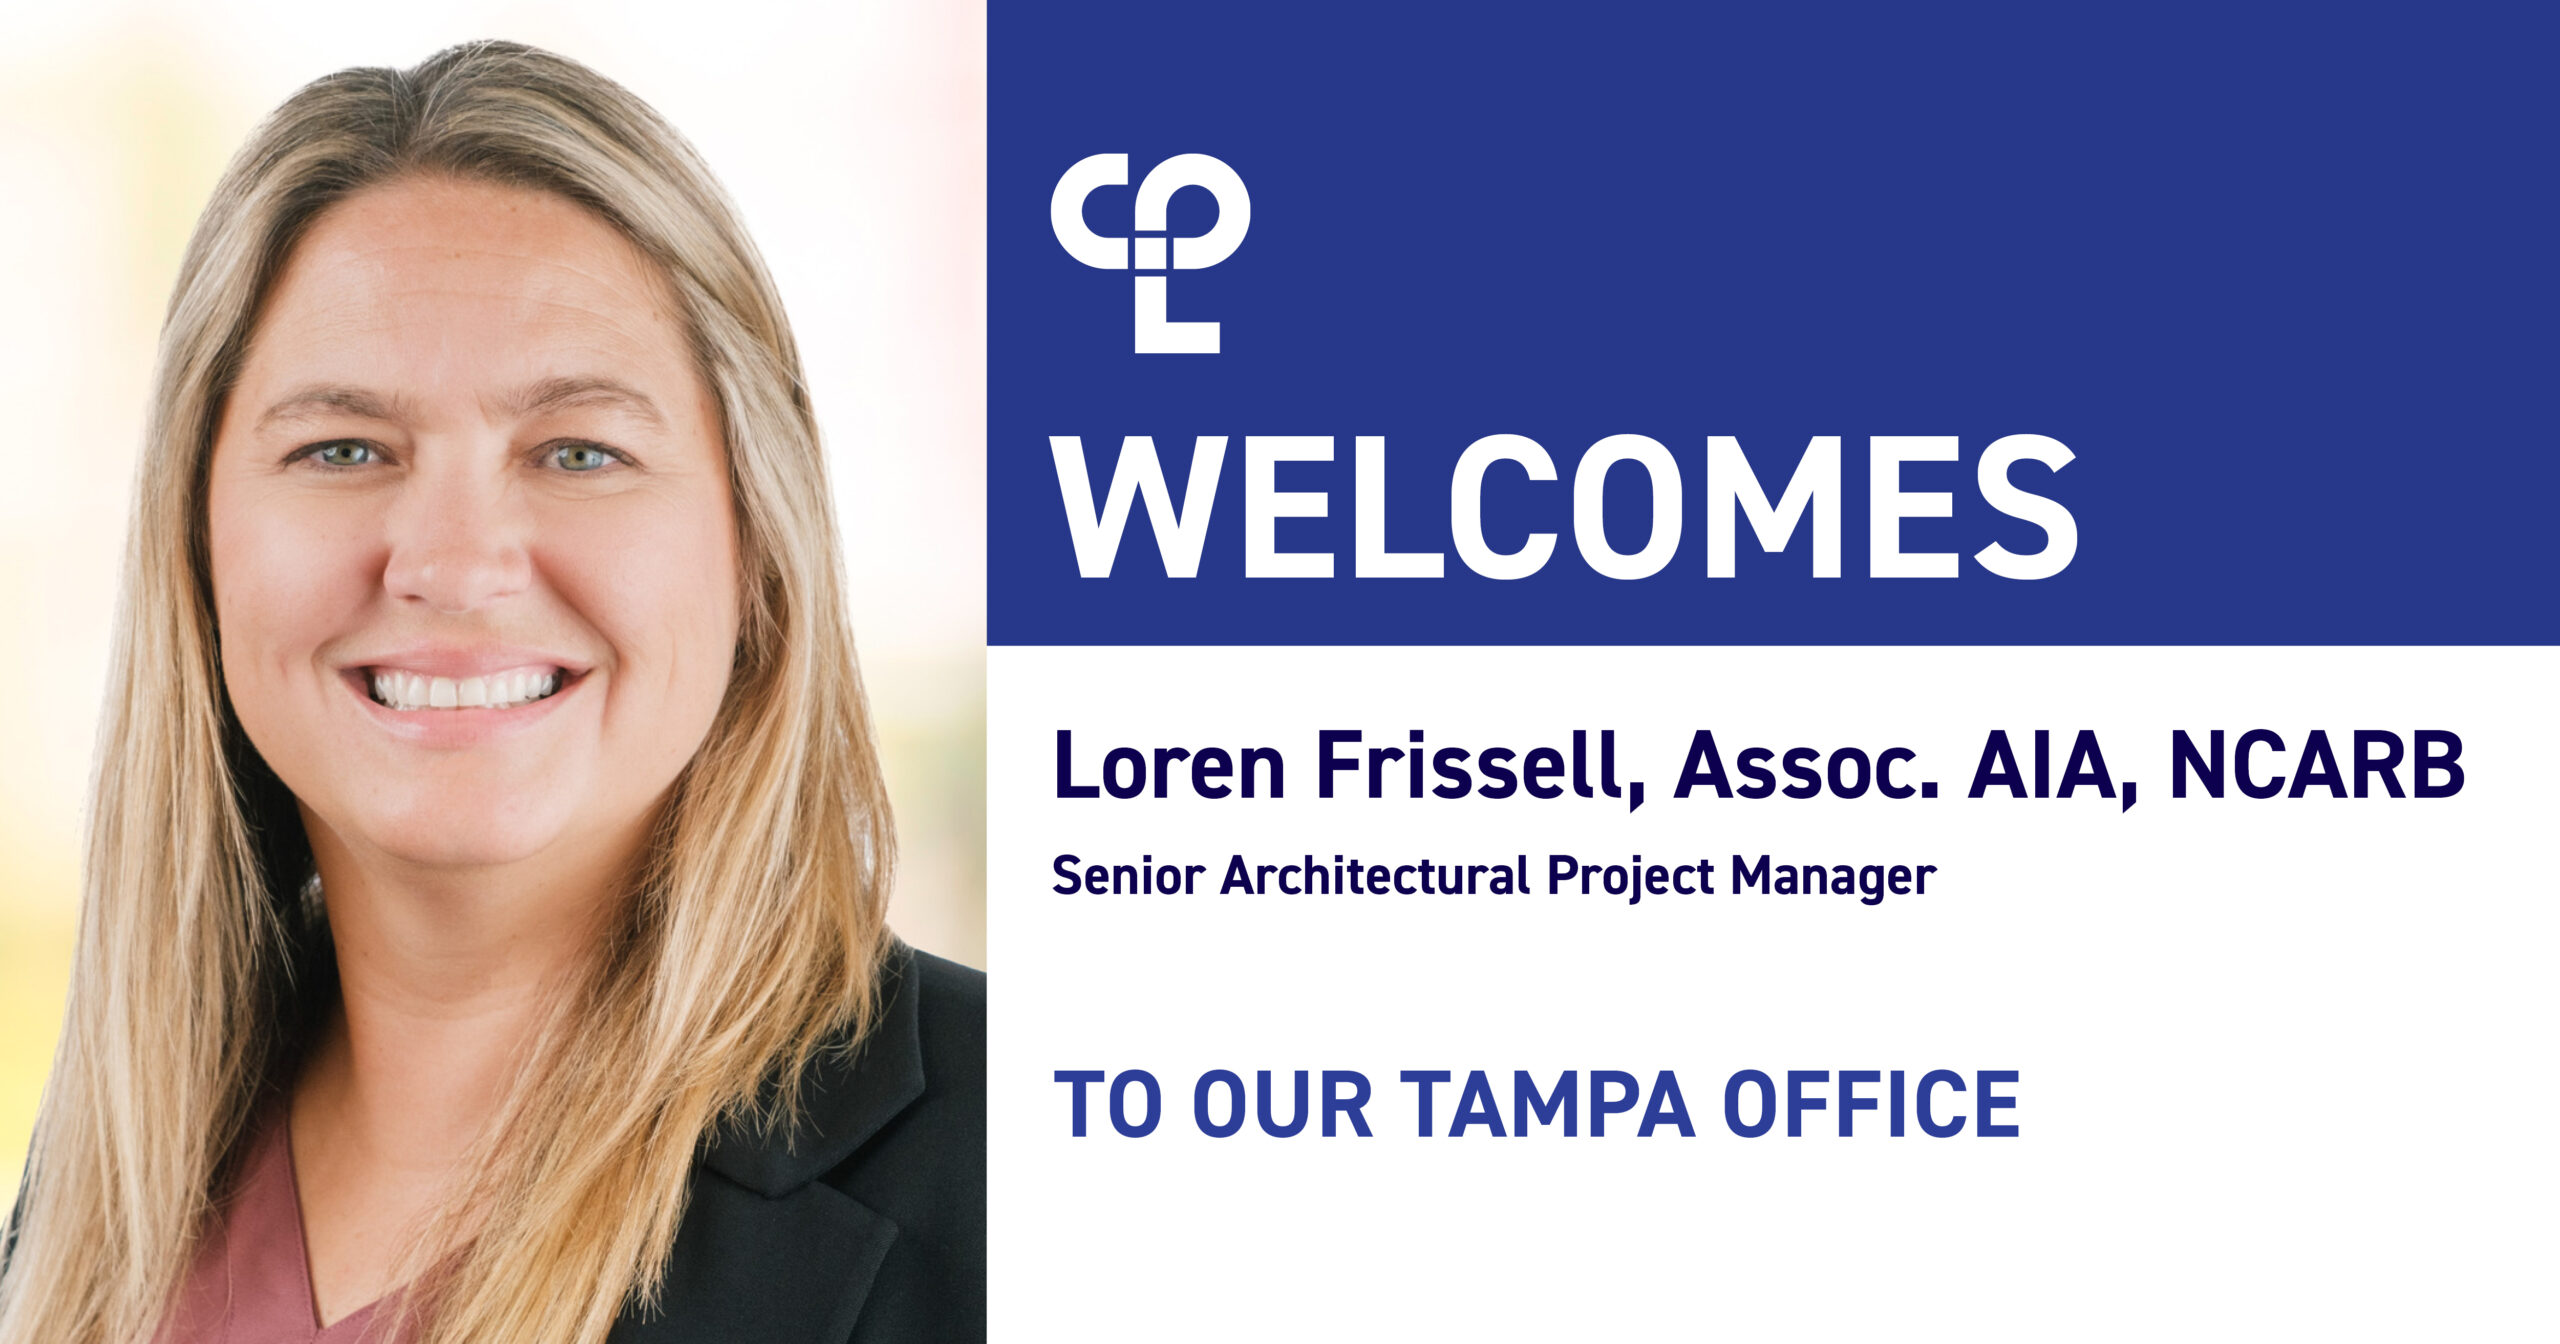 Woman with straight blonde hair smiles next to text that reads "CPL Welcomes Loren Frissell, Assoc. AIA, NCARB, Senior Architectural Project Manager, to our Tampa office."